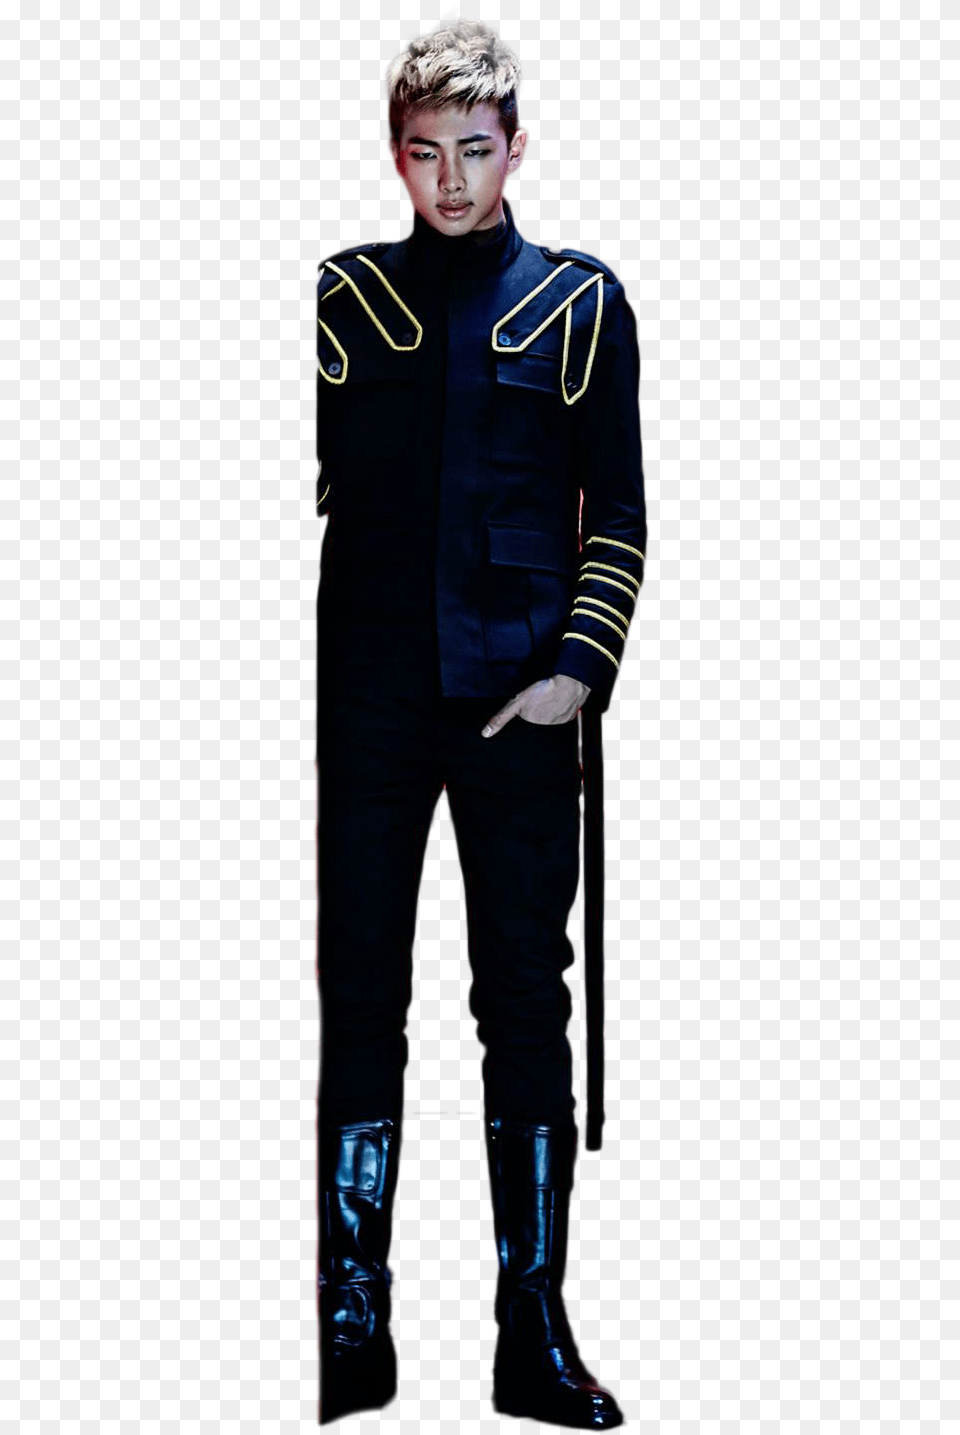 Namjoon Dry Suit, Adult, Man, Formal Wear, Person Png